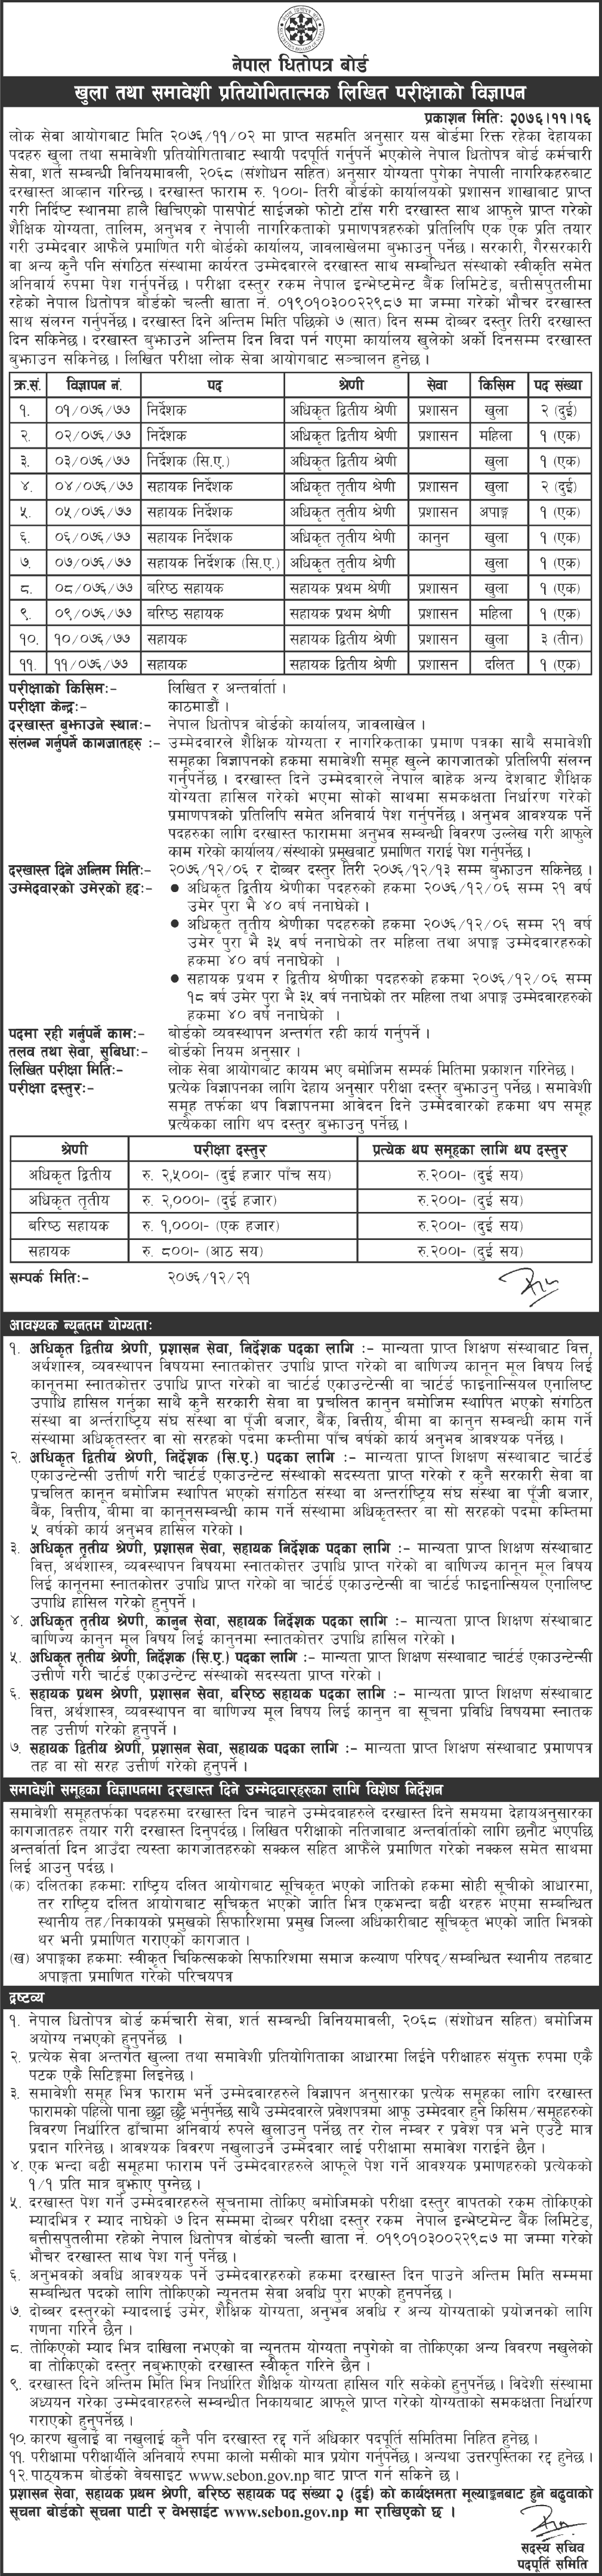 Nepal Dhitopatra Board Vacancy for Various Positions